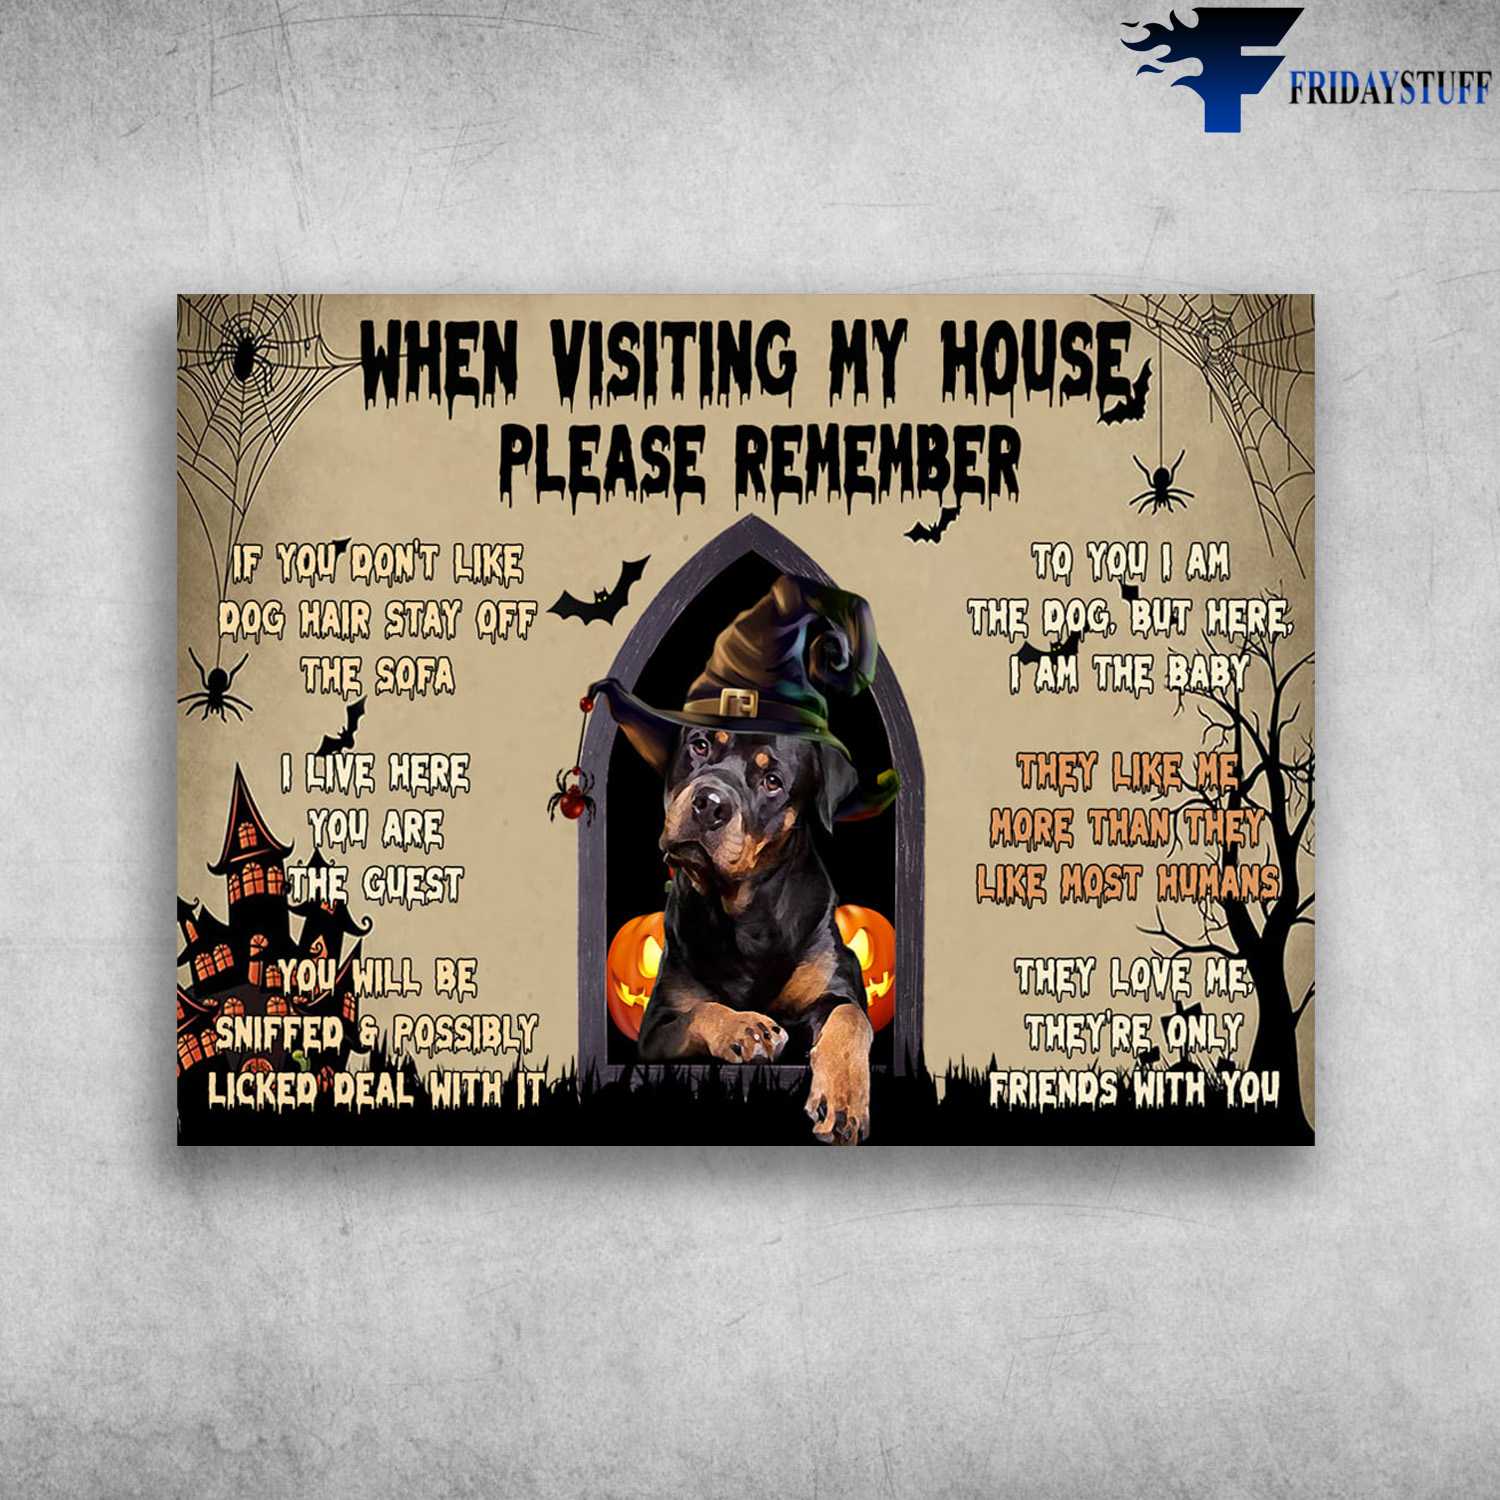 Rottweiler Witch - When Visiting My House, Please Remember, If You Don't Like Dog Hair Stay Of The Sofe, I Live Here, You Are The Guest, To You I Am Dog, But Here I Am The Baby